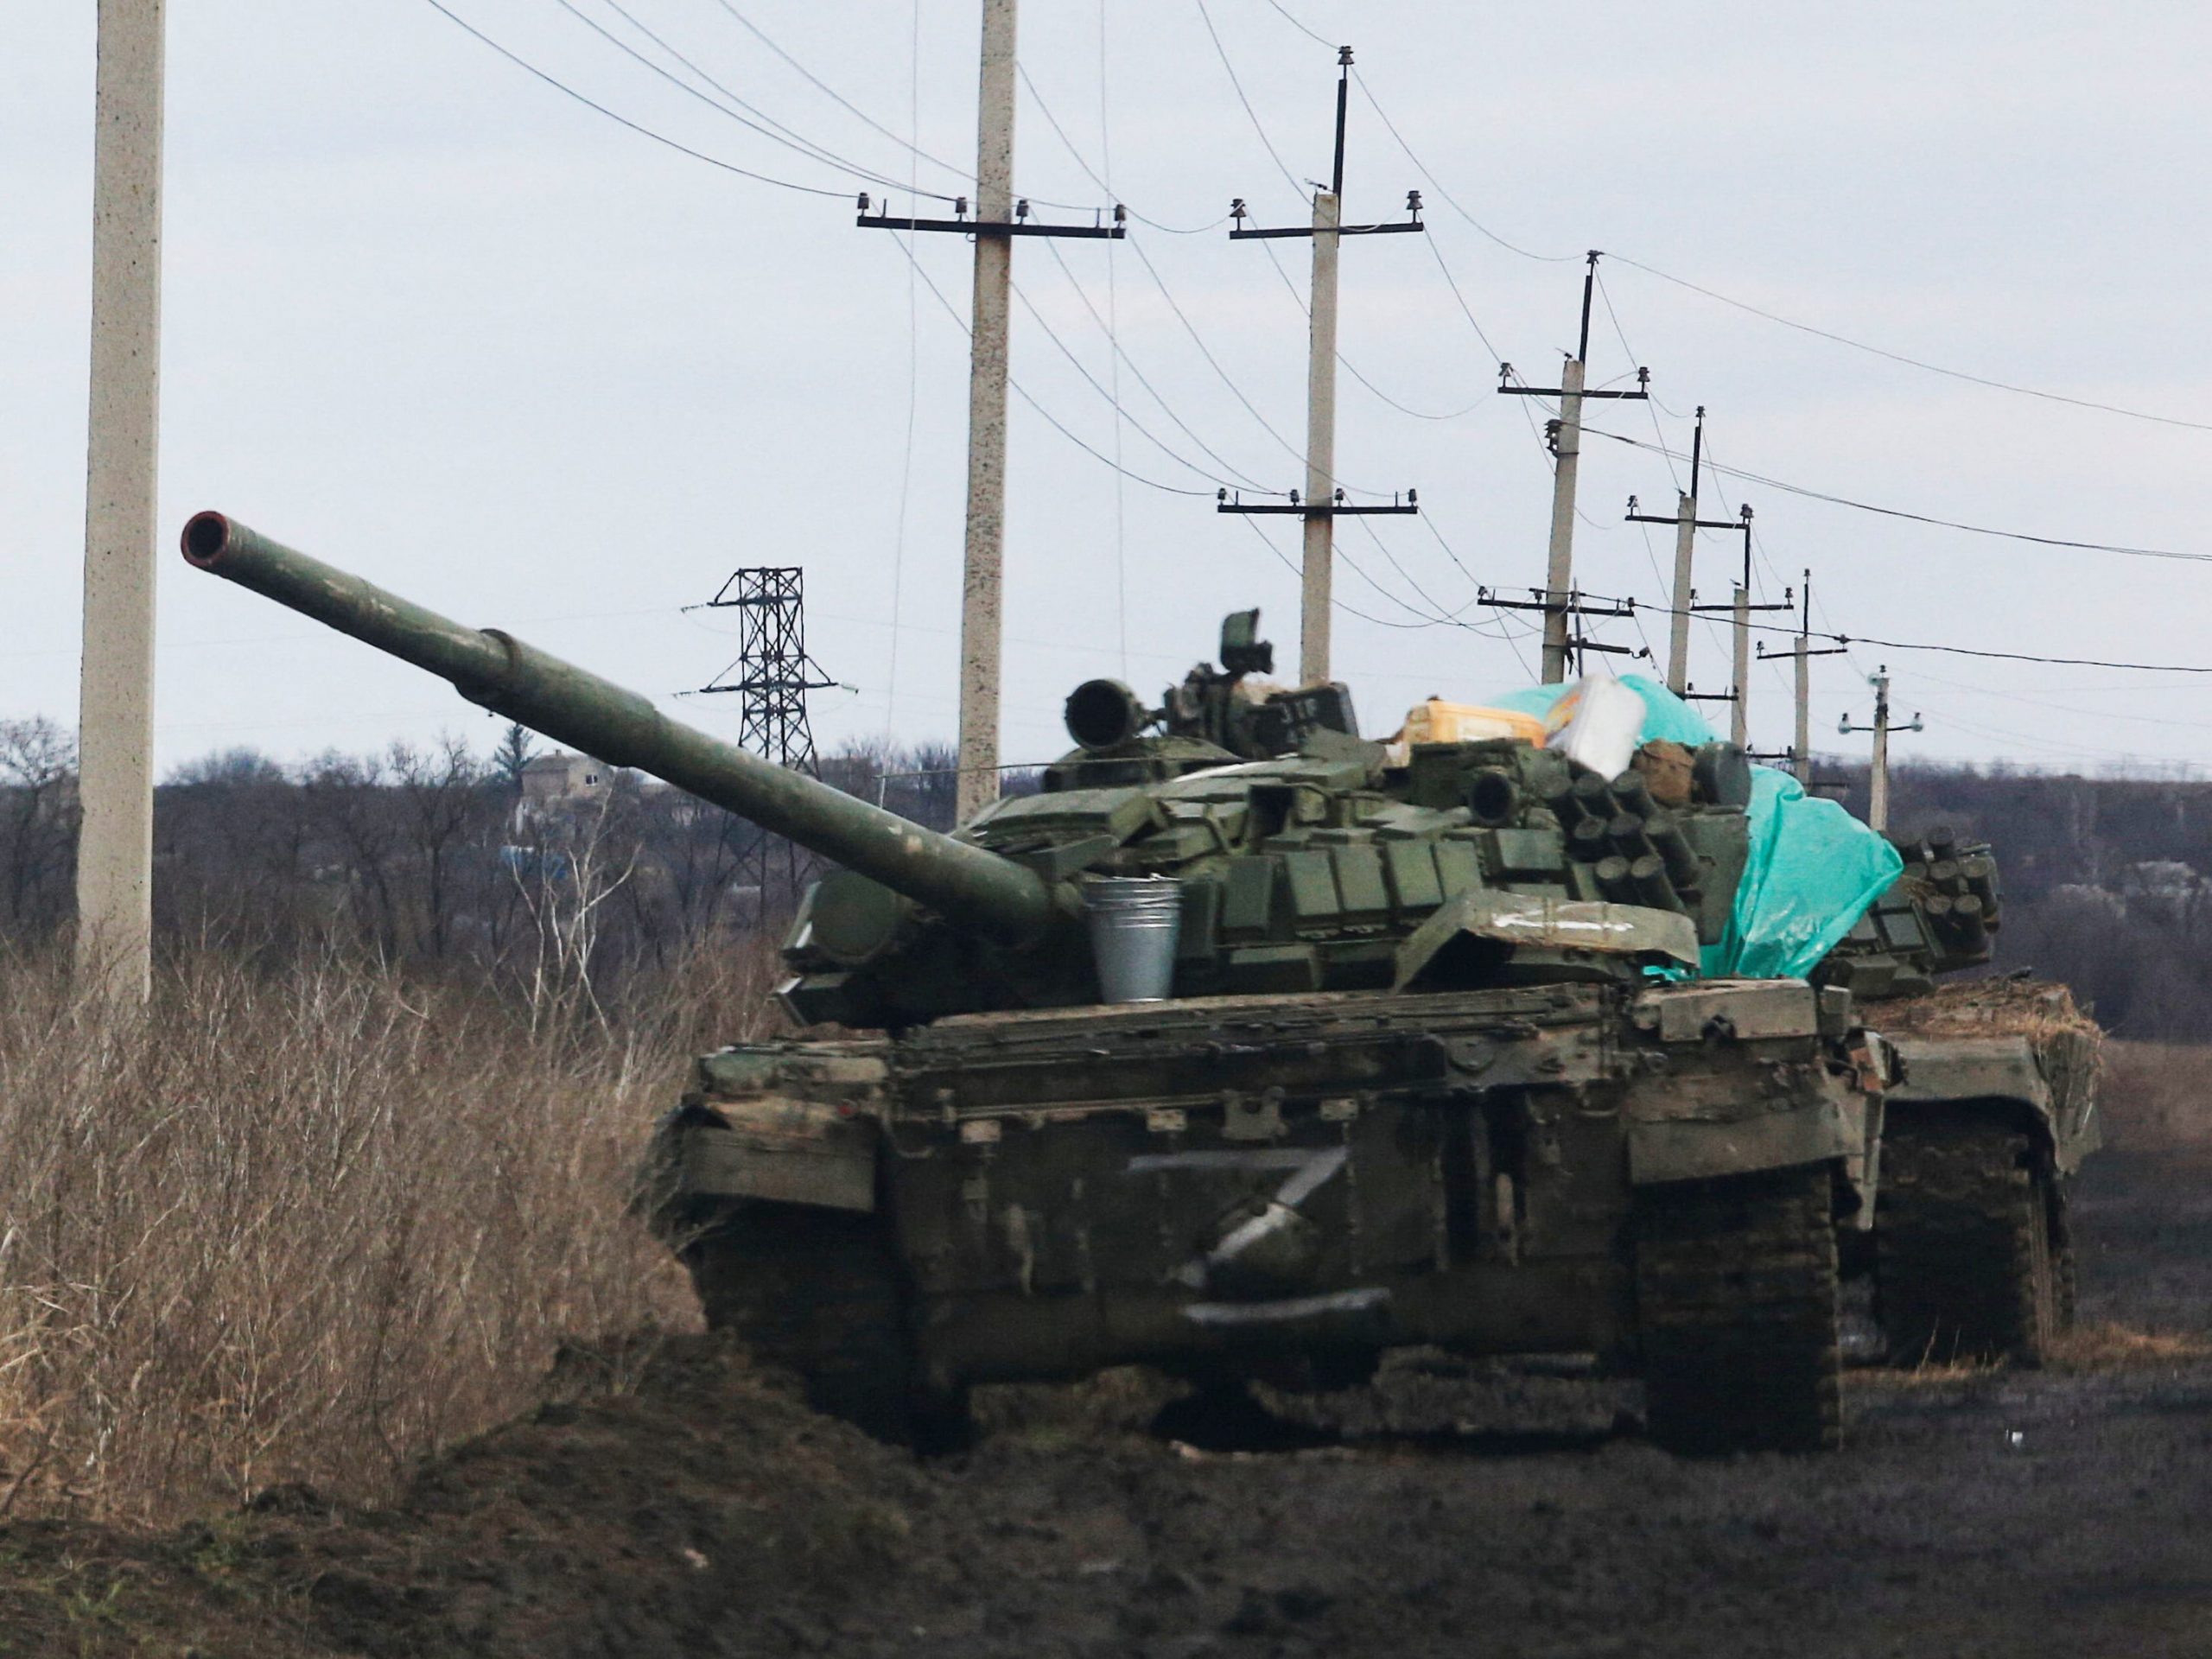 A tank with the symbol "Z" painted on its side is seen in the separatist-controlled village of Bugas during Ukraine-Russia conflict in the Donetsk region, Ukraine March 6, 2022